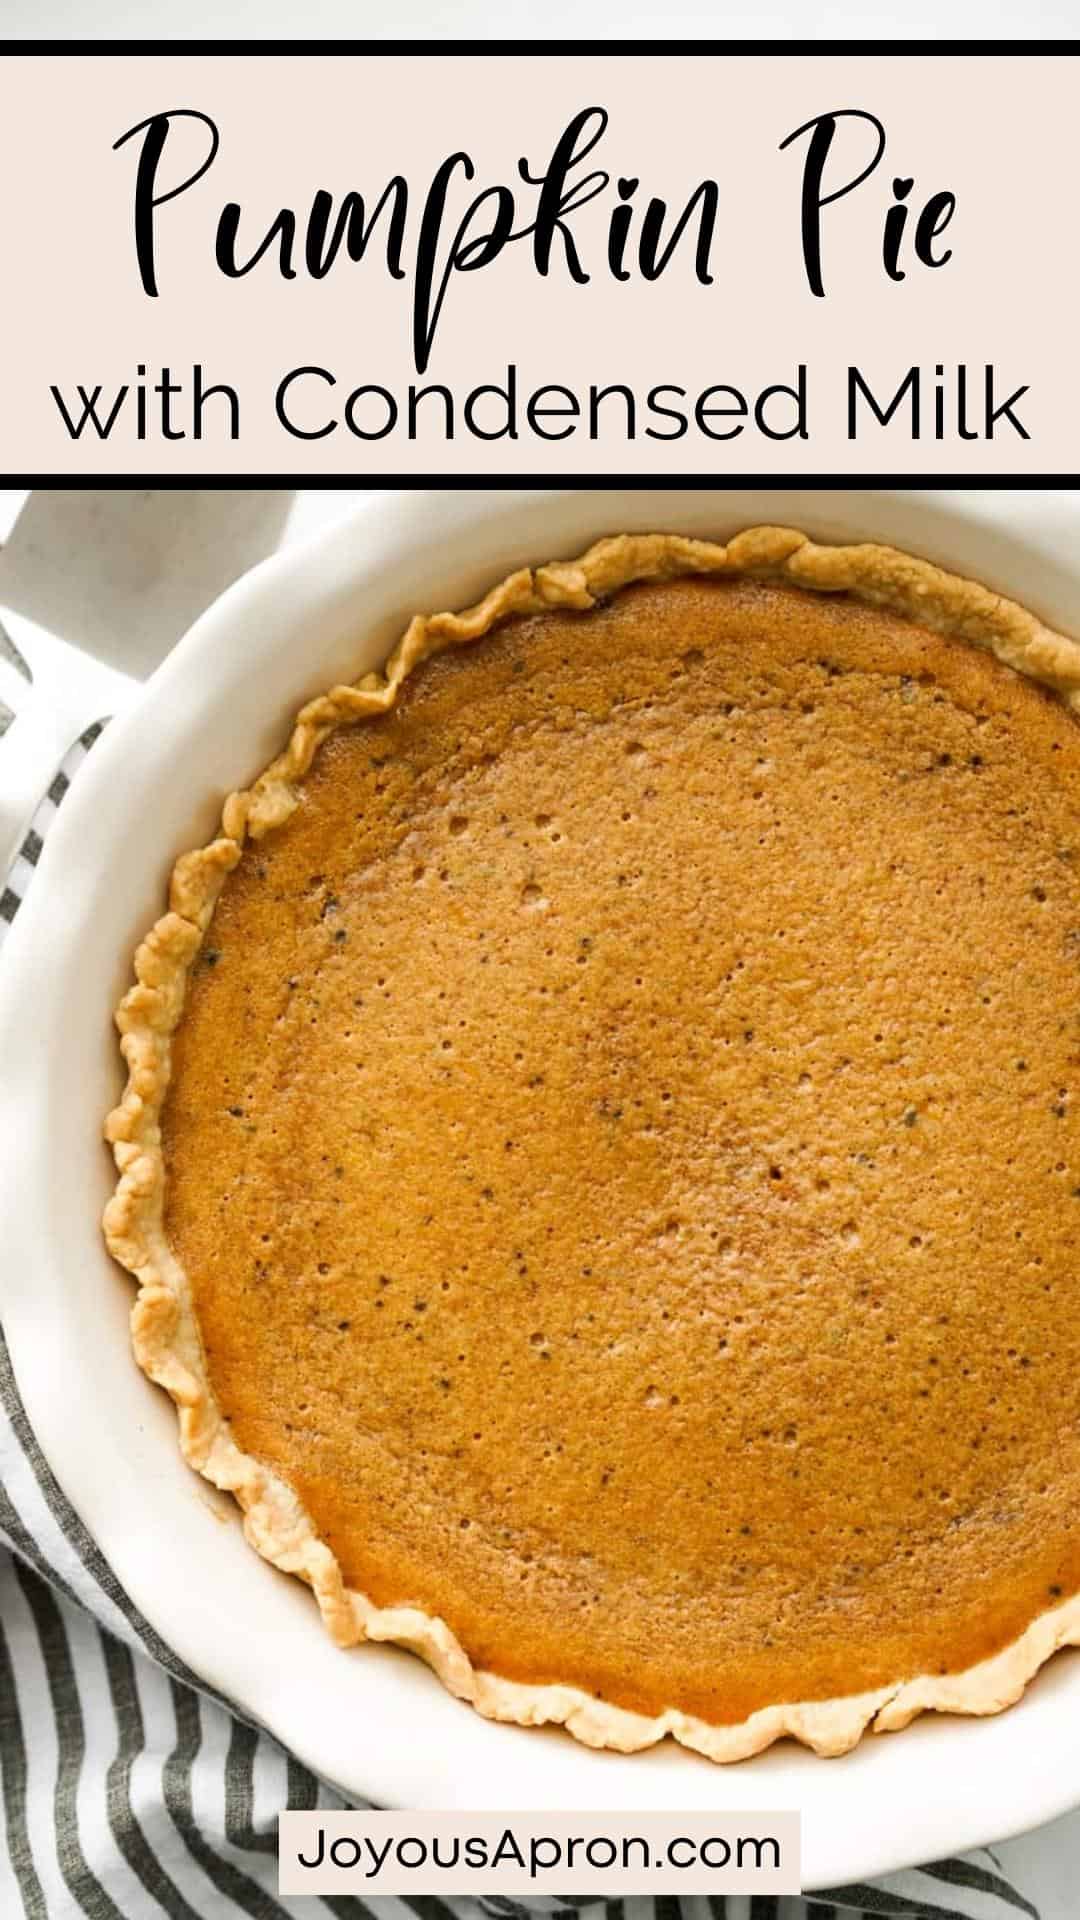 Pumpkin Pie - An easy pumpkin pie recipe made with sweetened condensed milk! Creamy, smooth and enhanced with flavors of cinnamon and nutmeg. A classic Fall dessert perfect for the Thanksgiving and Christmas holidays via @joyousapron